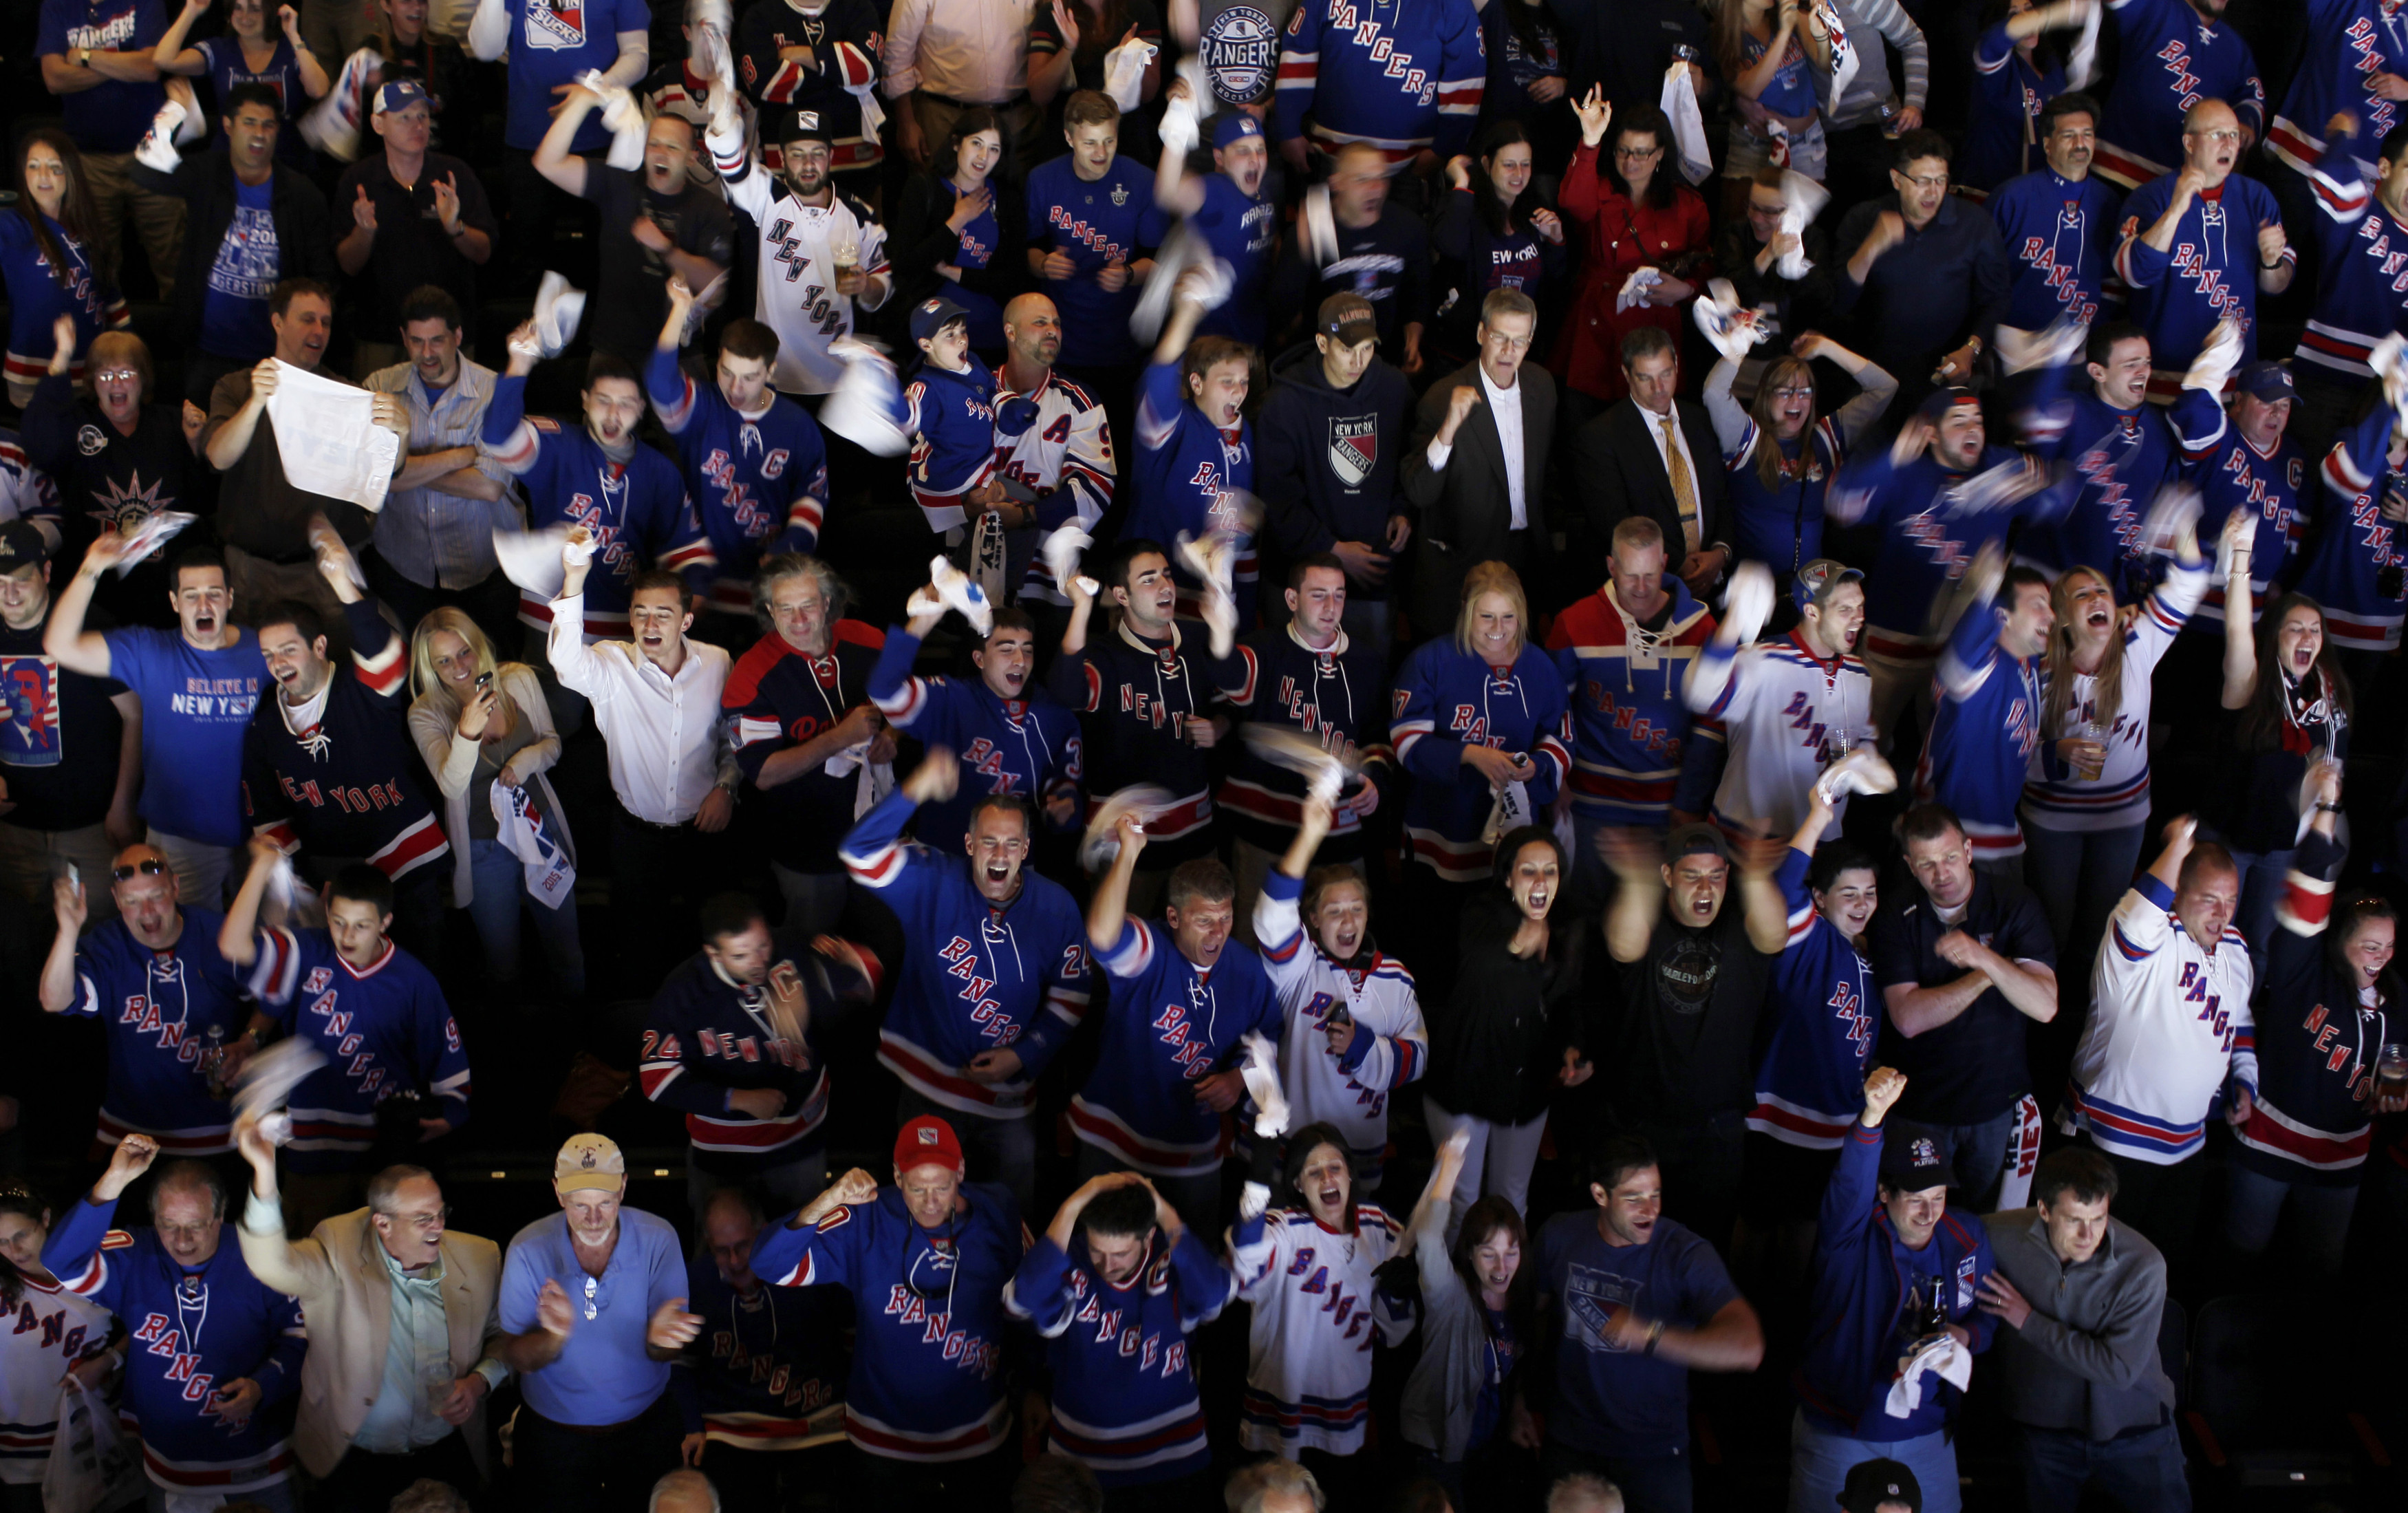 Metro North: The Devils, Rangers, and Islanders Are Ready to